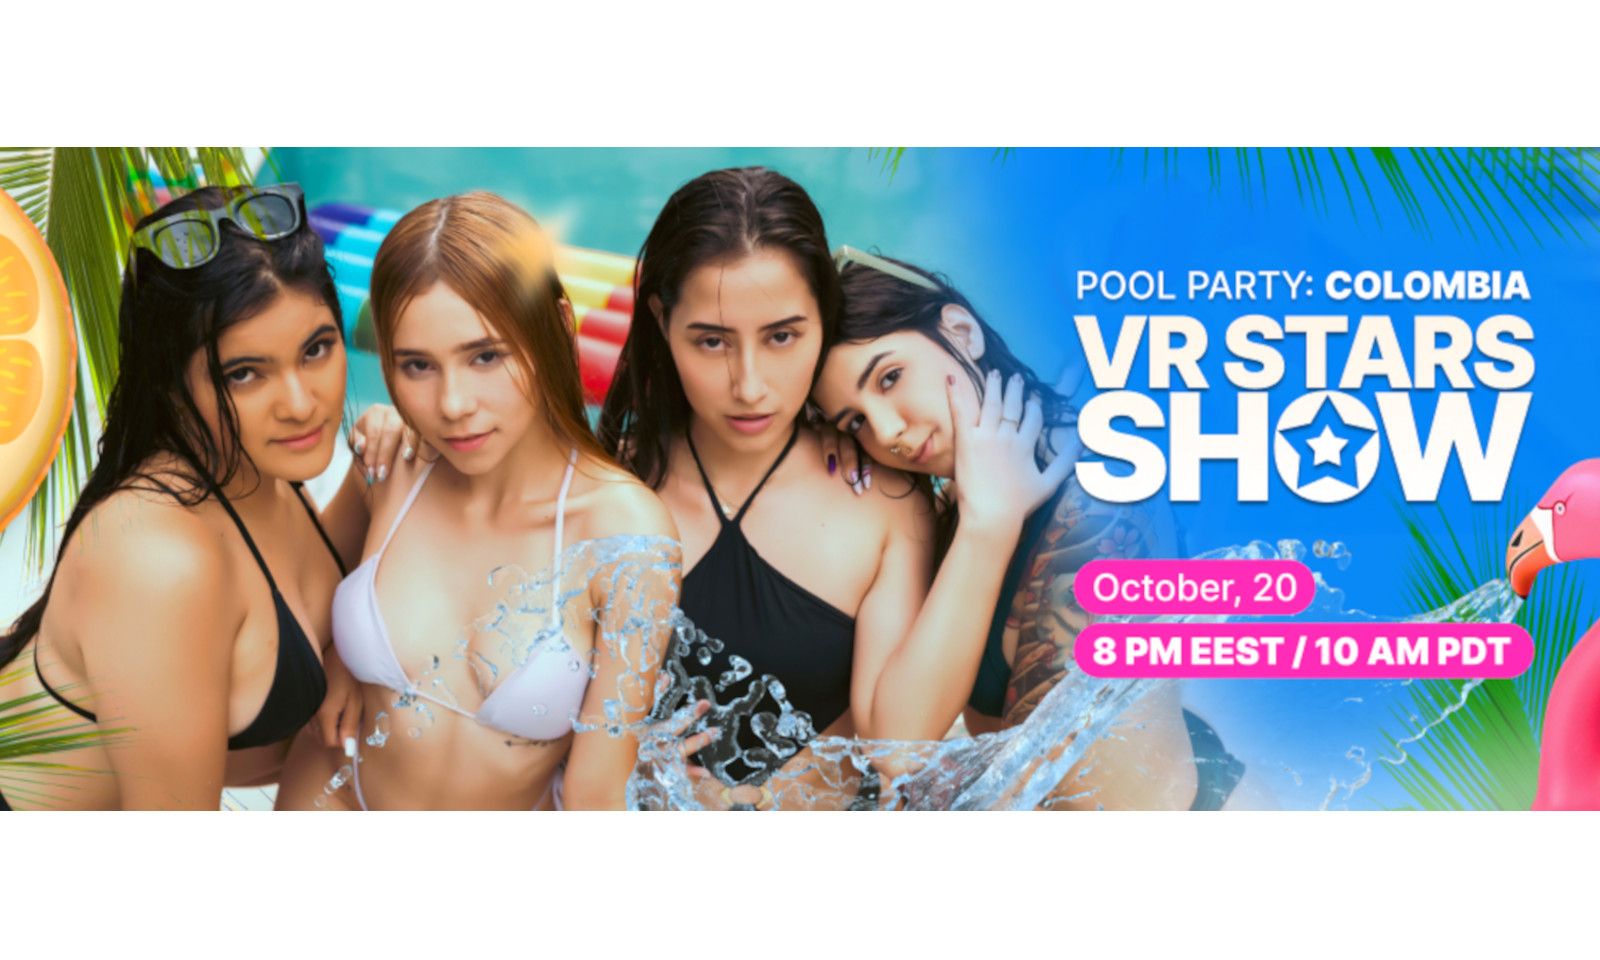 Dreamcam to Host 'VR Stars Show Pool Party: Colombia'